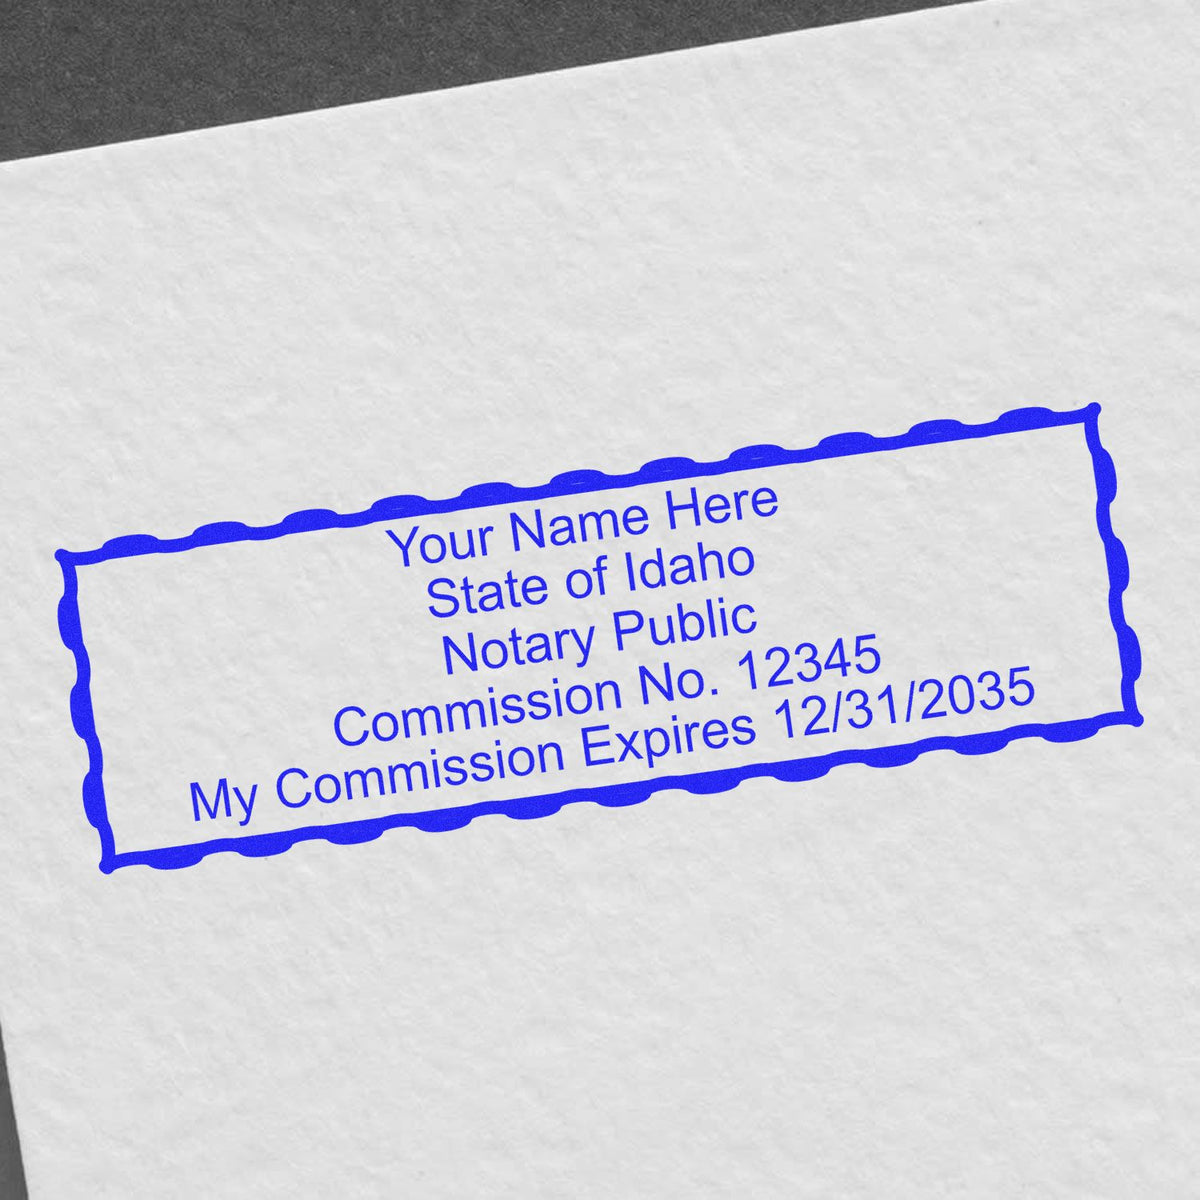 A photograph of the Heavy-Duty Idaho Rectangular Notary Stamp stamp impression reveals a vivid, professional image of the on paper.